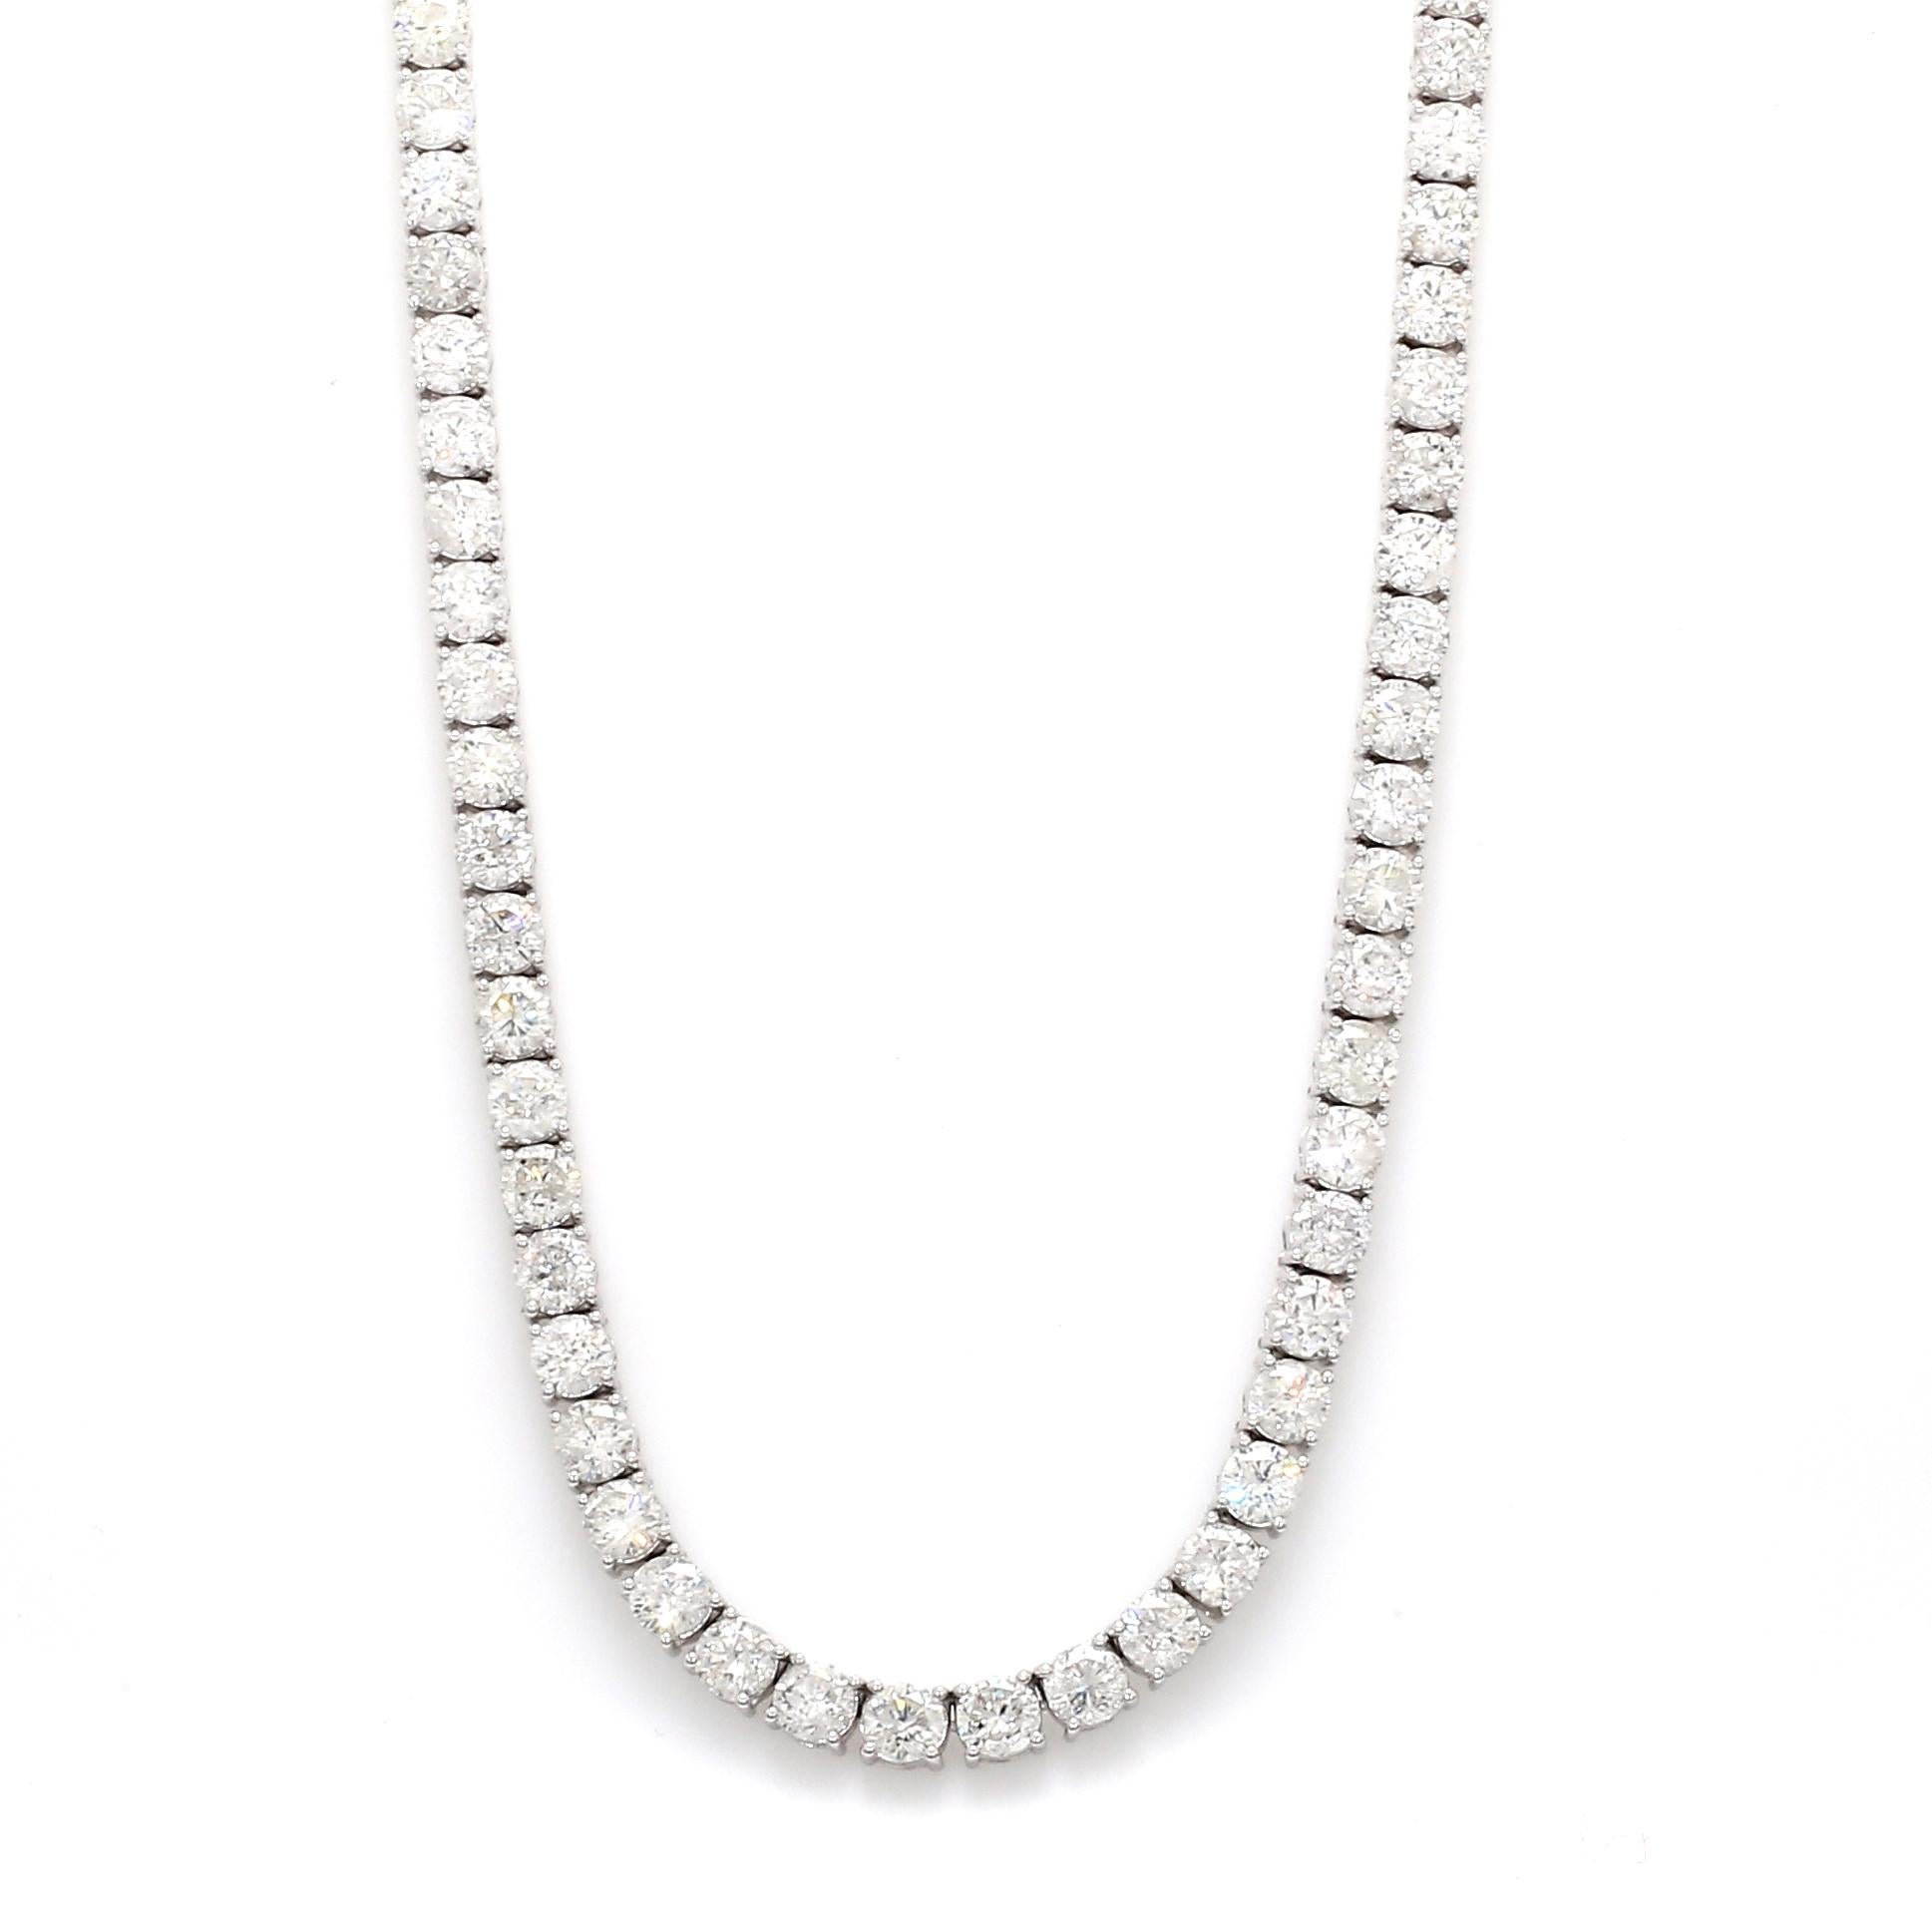 This diamond tennis chain necklace is the epitome of luxury and sophistication. Whether worn as a standalone statement piece or layered with other necklaces for a personalized look, it effortlessly enhances any attire, from formal occasions to